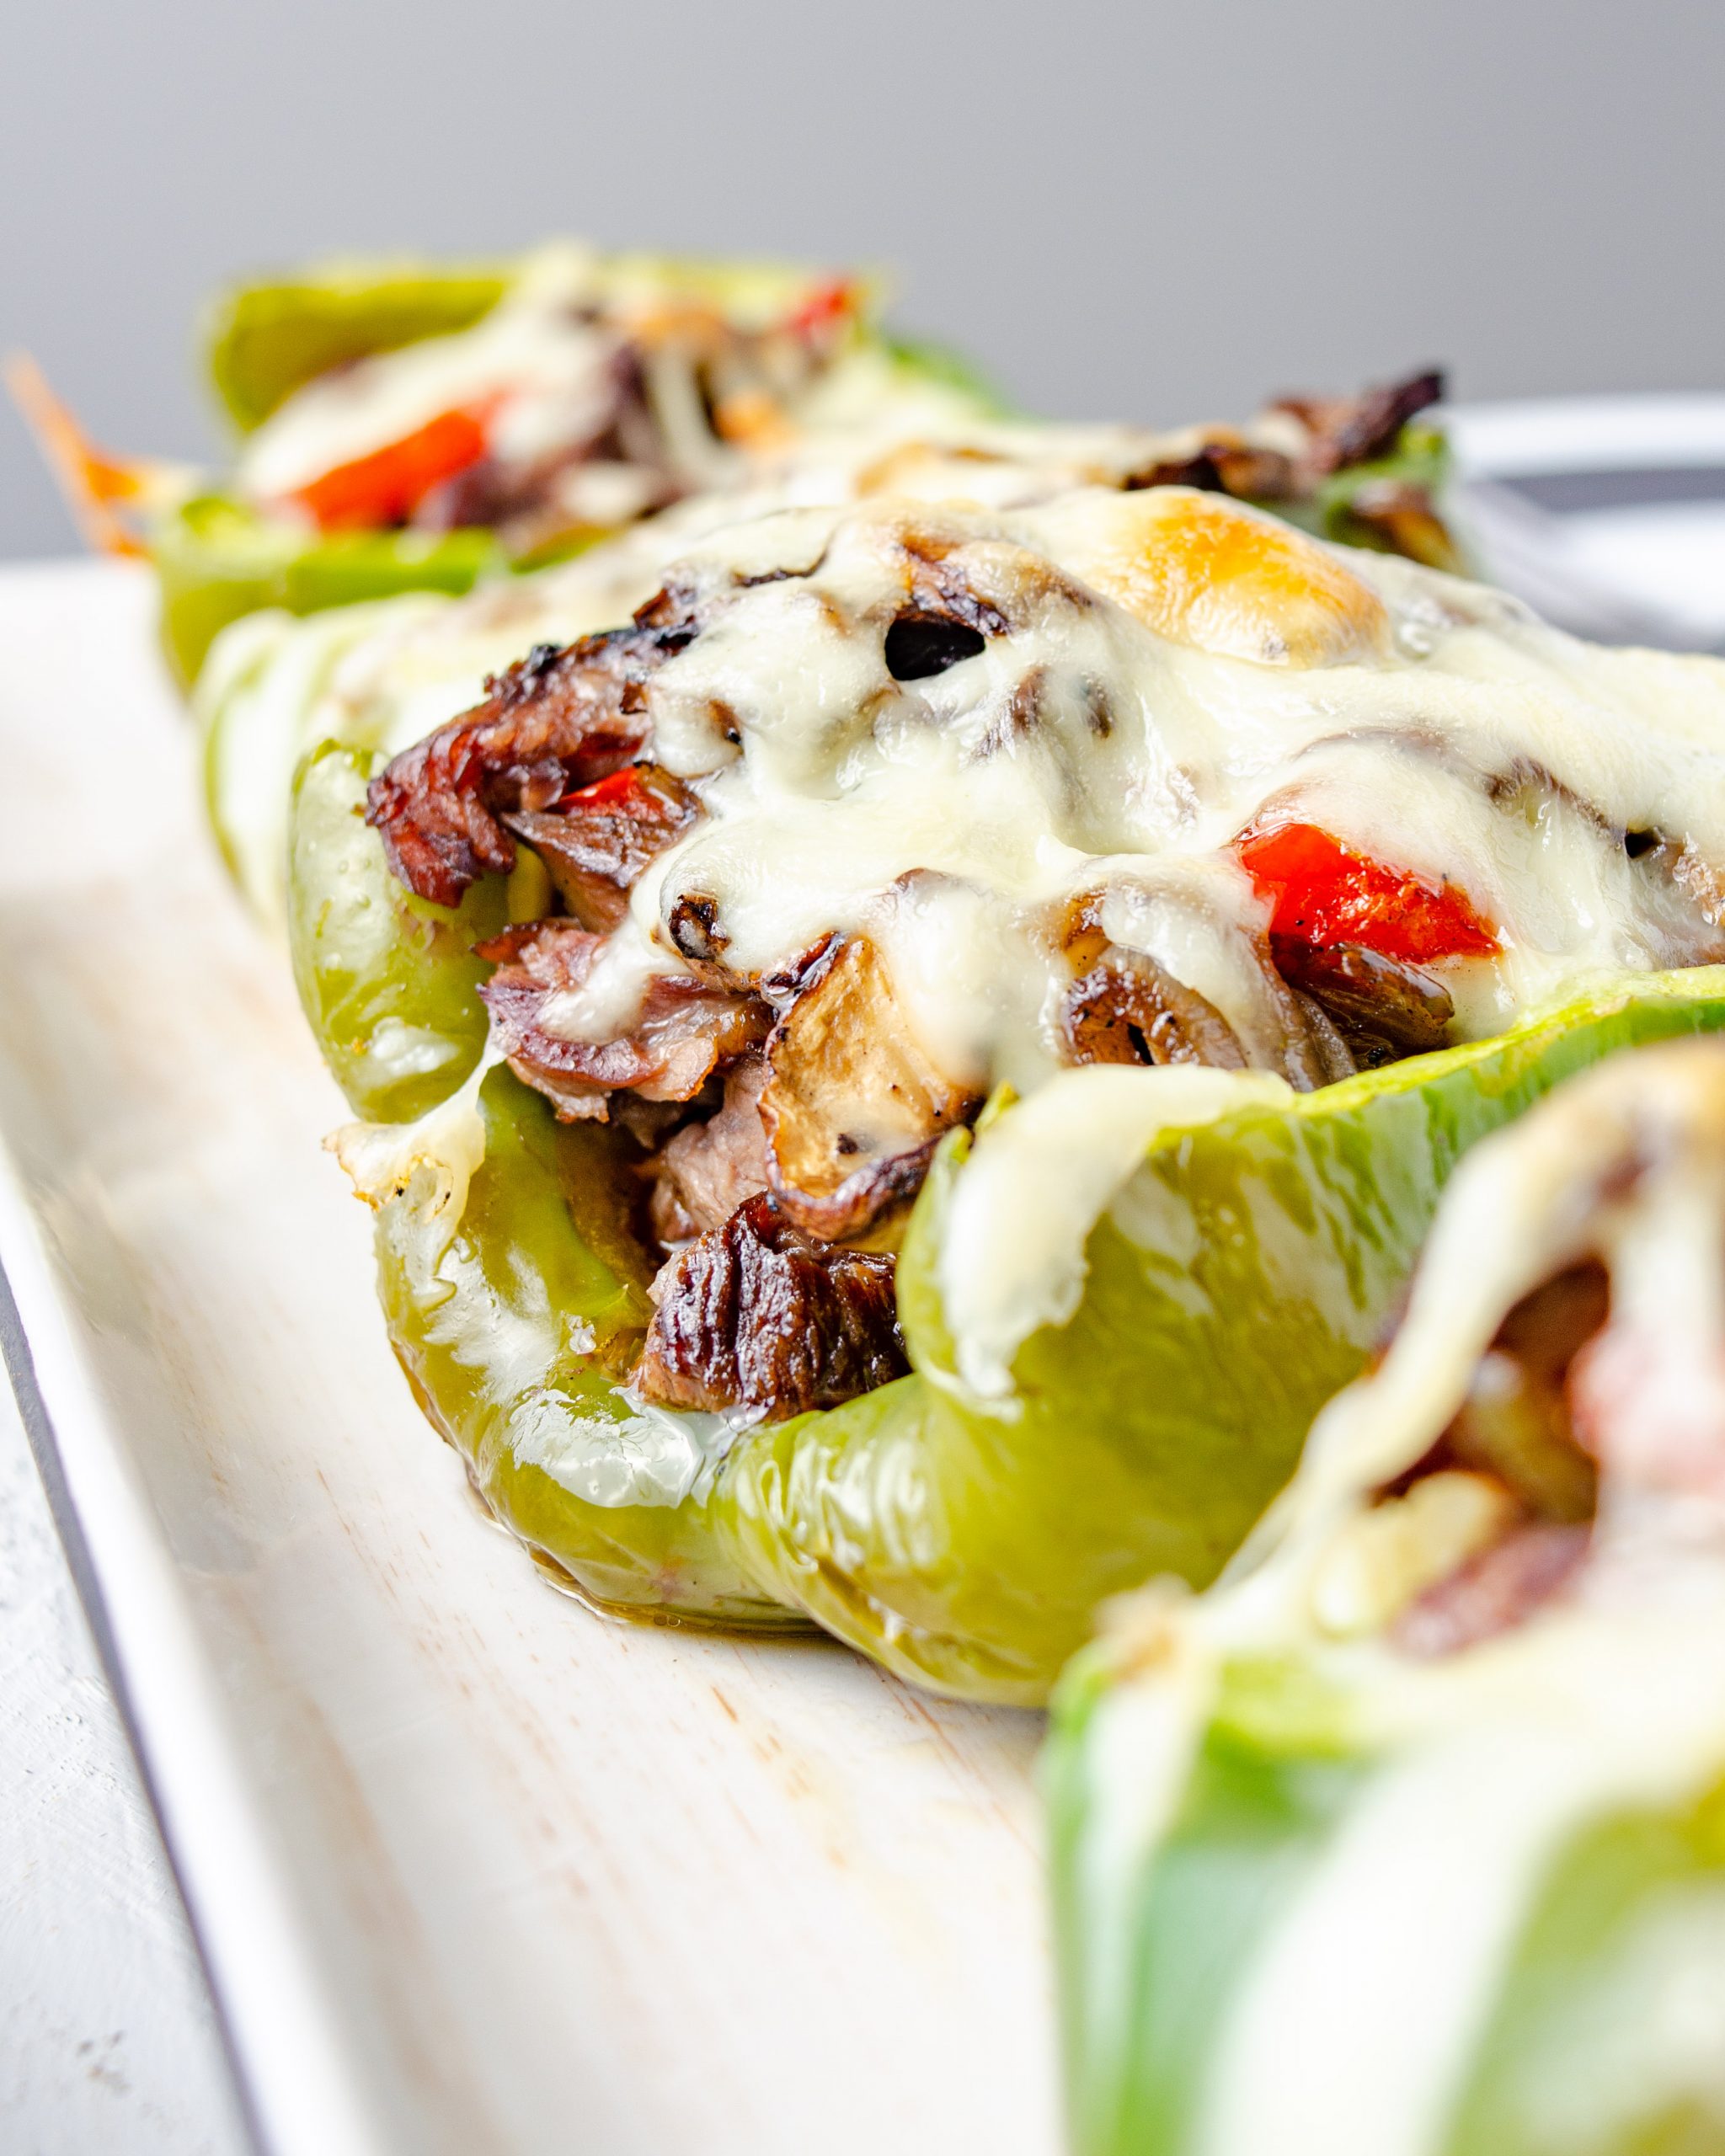 Philly Cheesesteak Stuffed Peppers, cheesesteak stuffed peppers